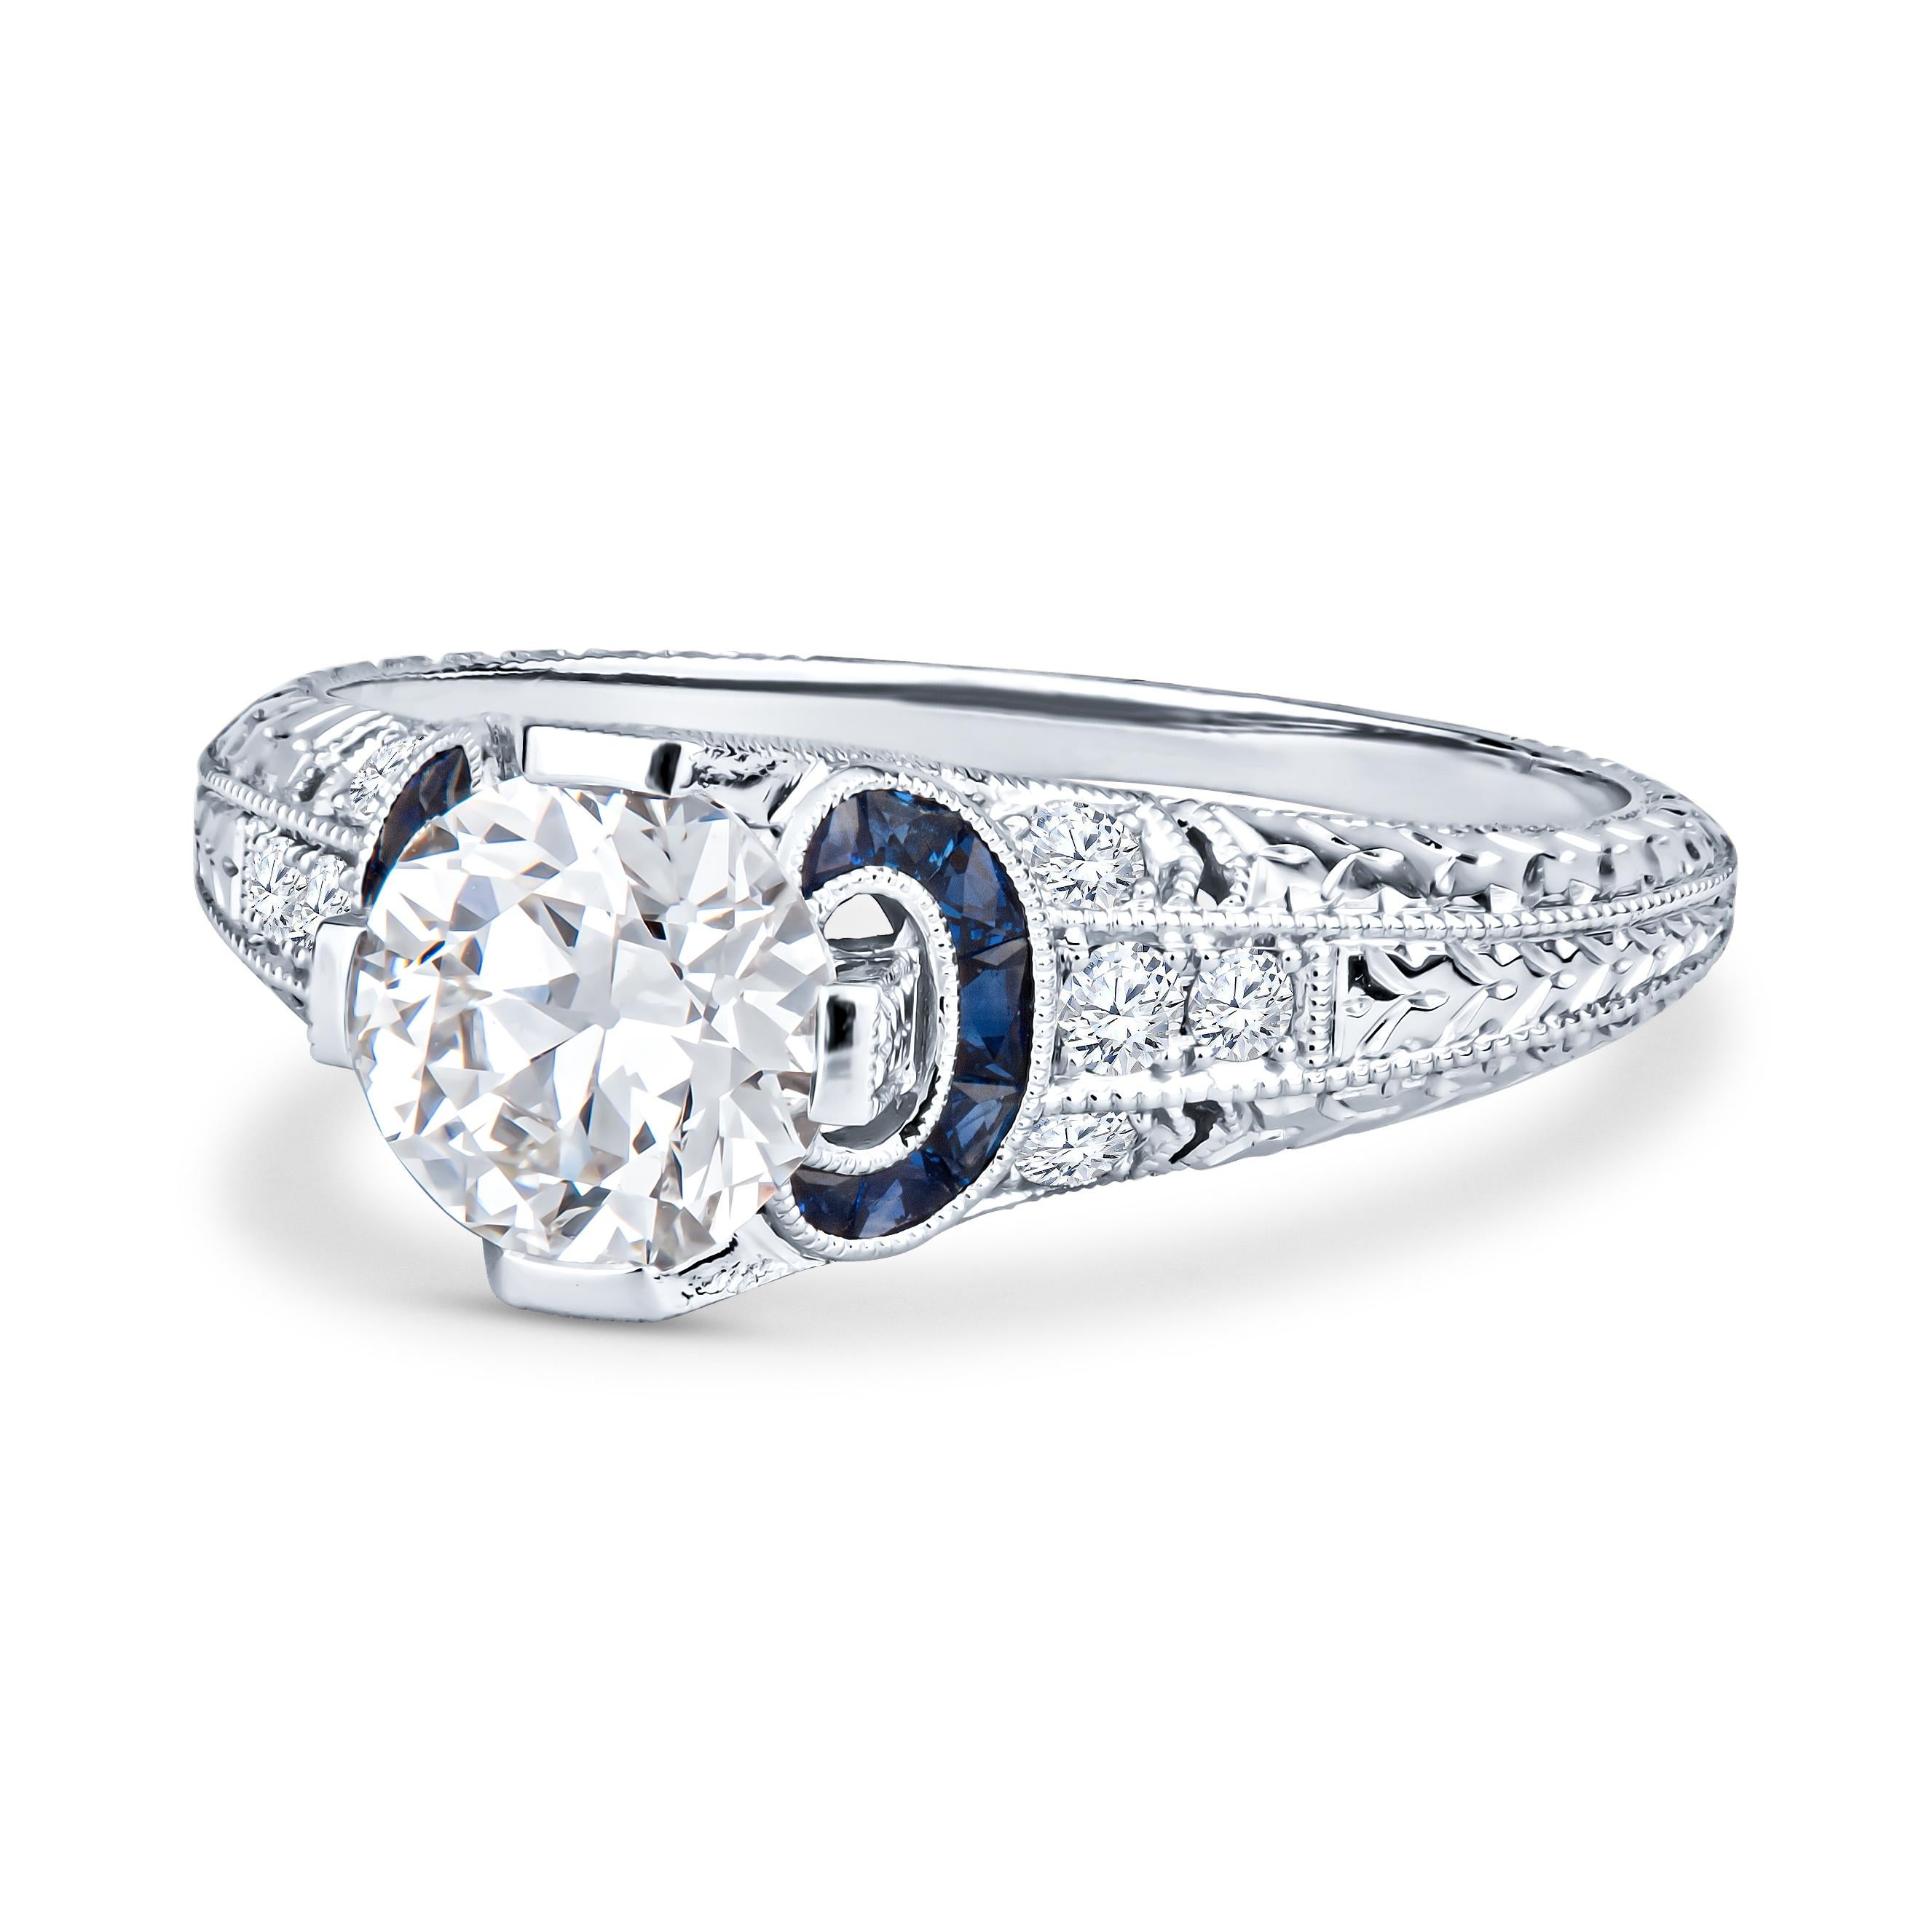 This unique Shaftel Diamonds engagement ring features a 1.03ct round diamond with 0.21ct total weight in blue sapphires and 0.14ct total weight in accent diamonds. The ring is an antique-looking, vintage-inspired engagement ring, with intricate